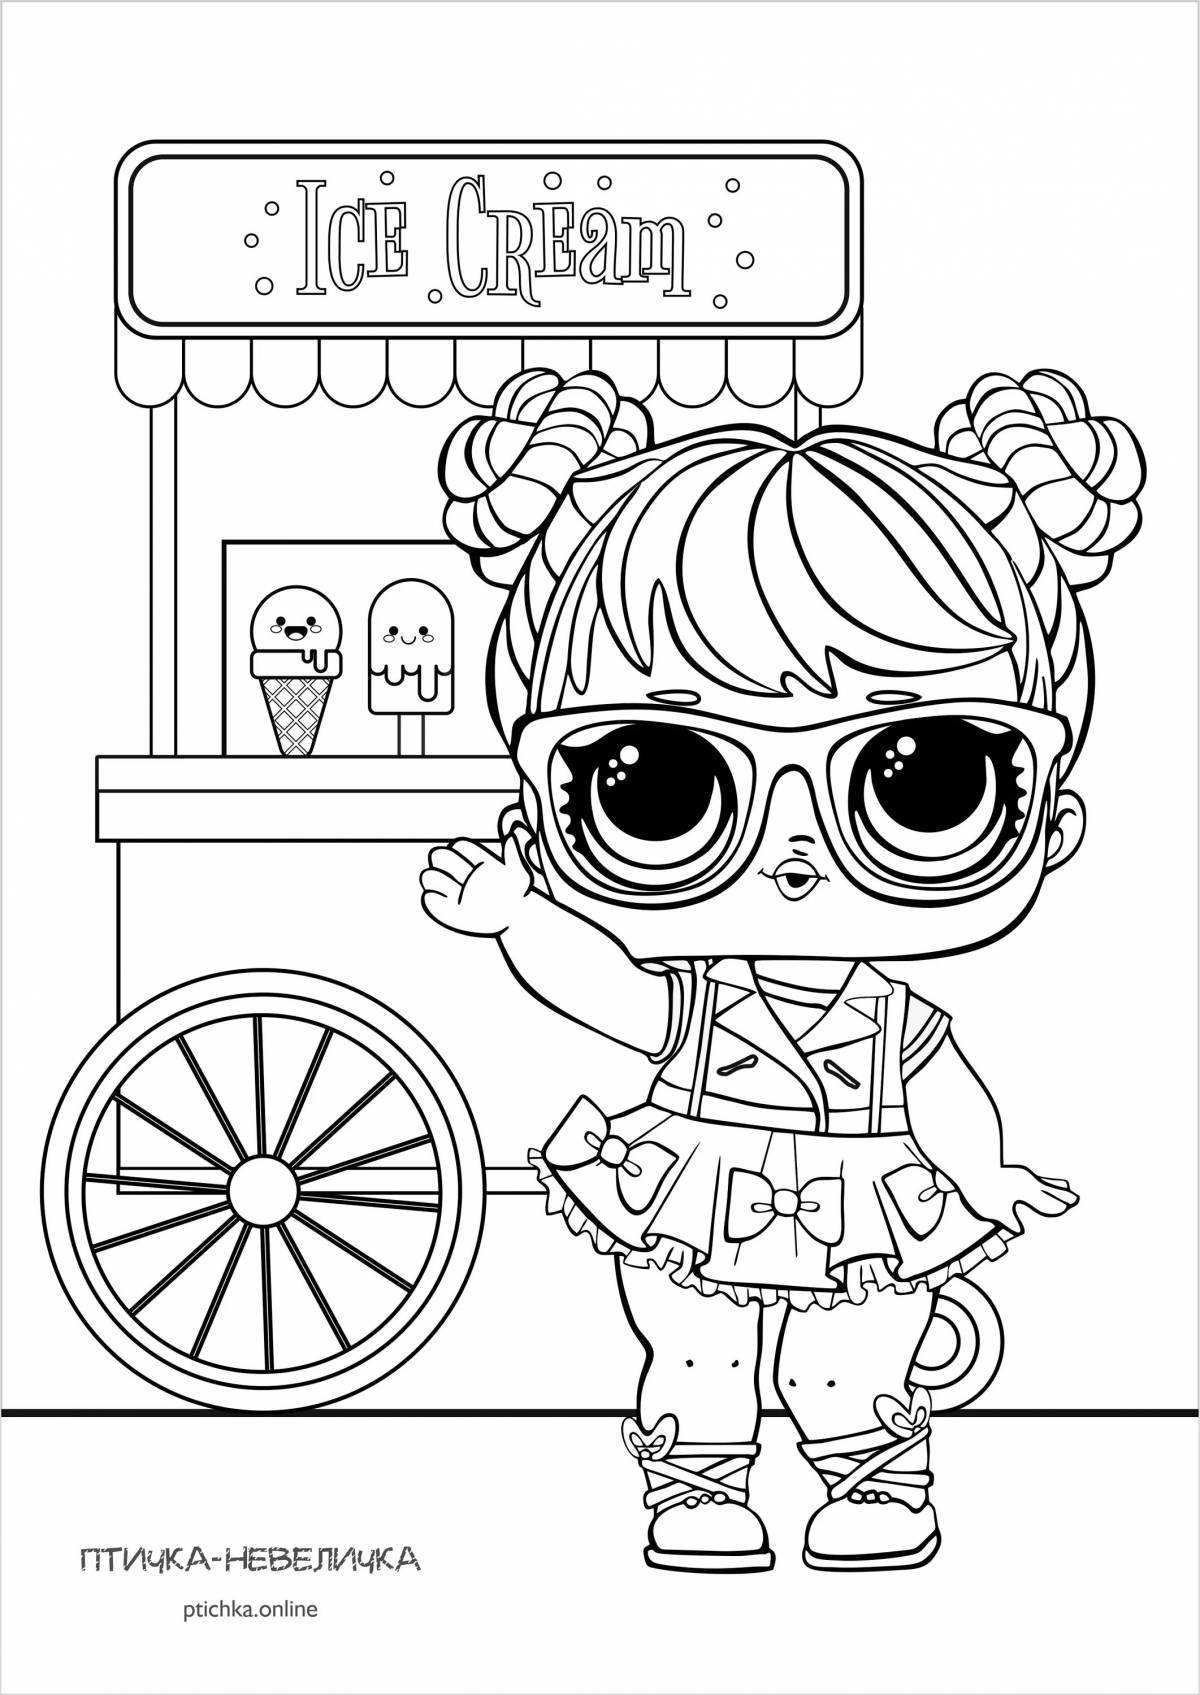 Colored dolls lol coloring book